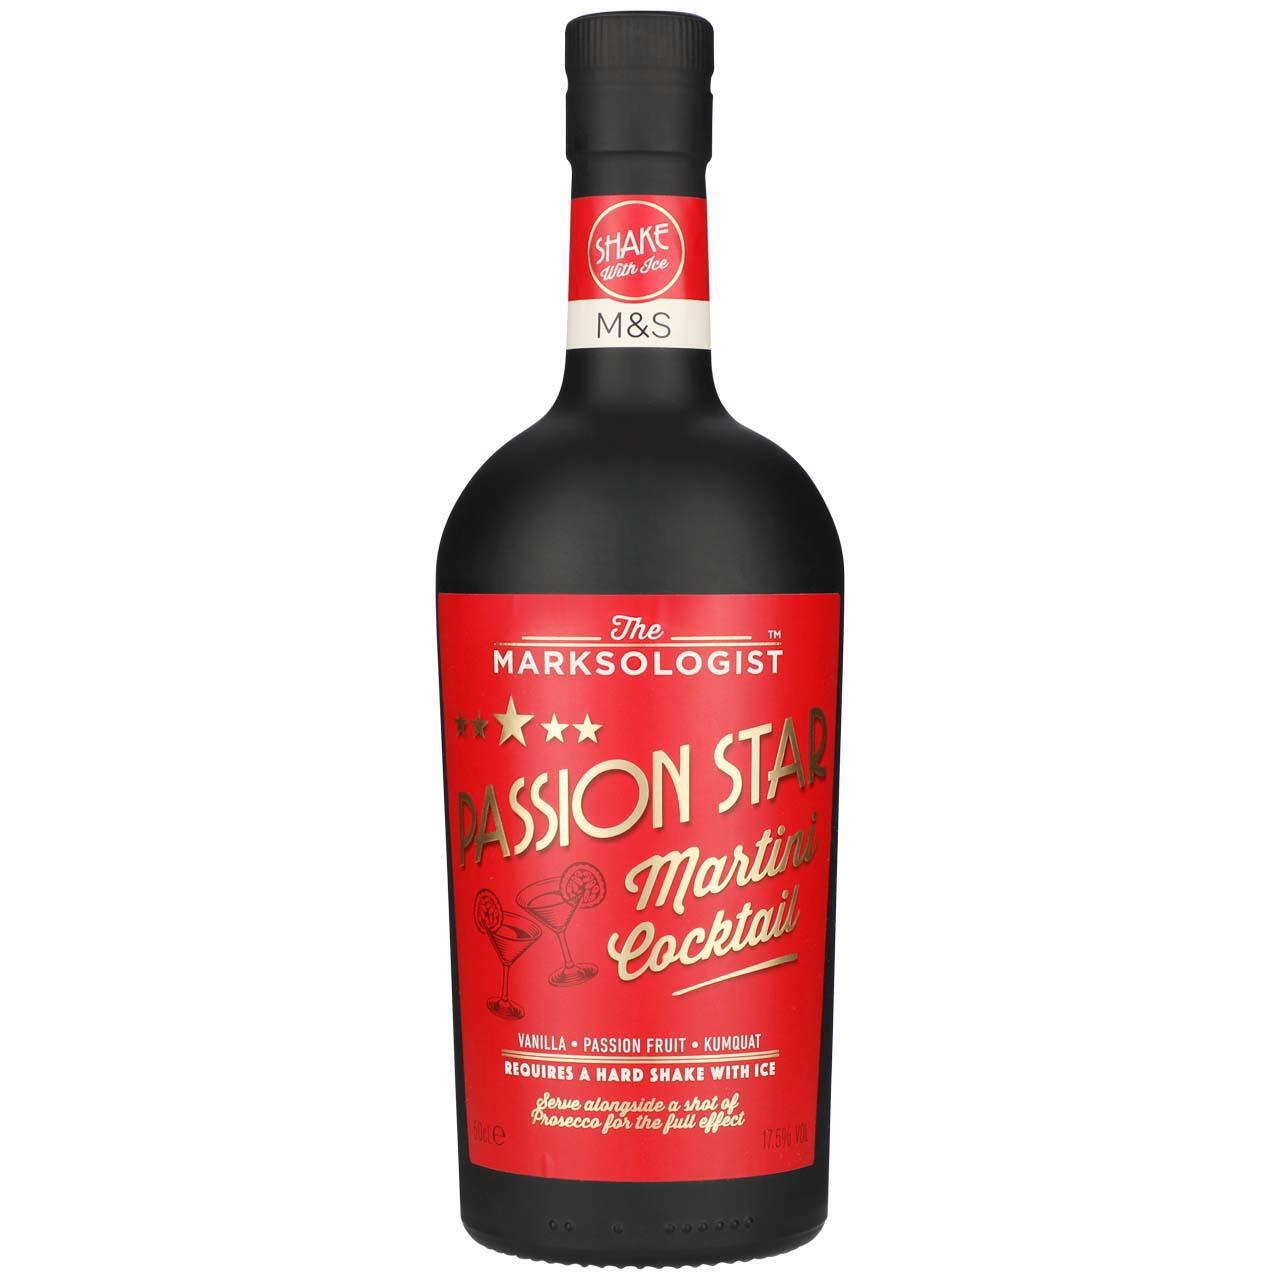 M&S Marksologist Passion Star Martini Cocktail 500ml